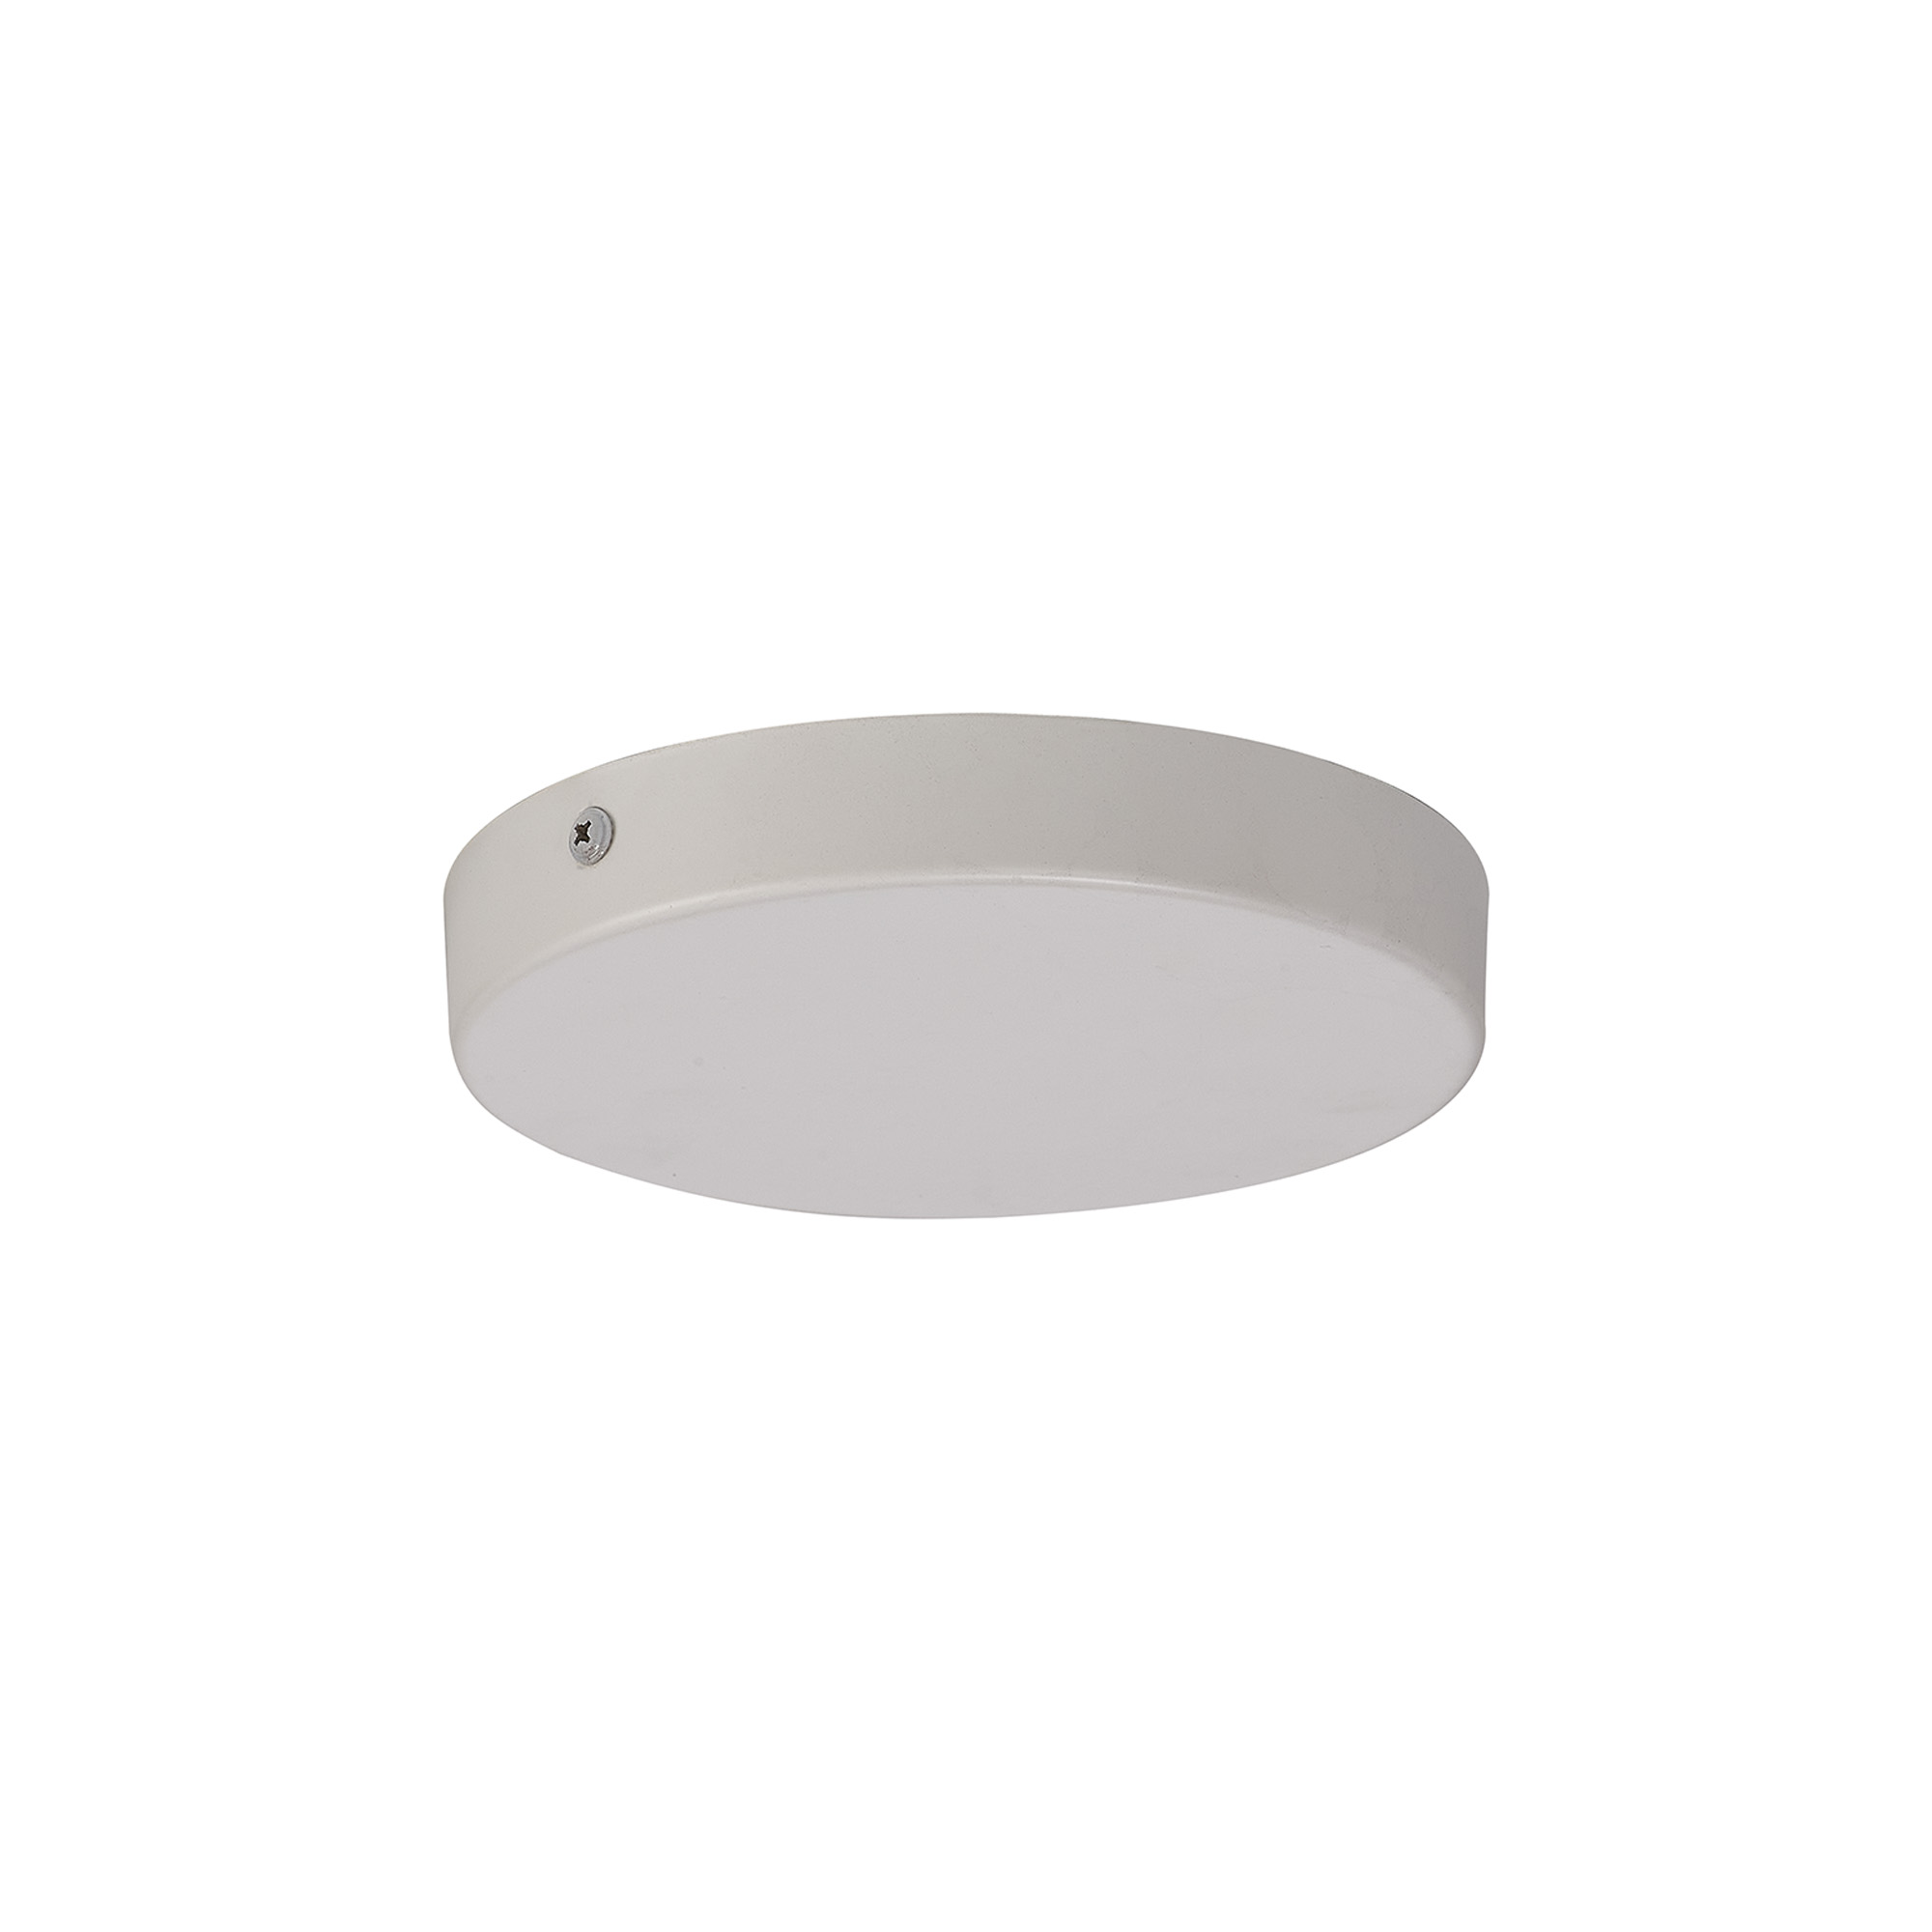 D0828WH/NH  Hayes No Hole 15cm Ceiling Plate White